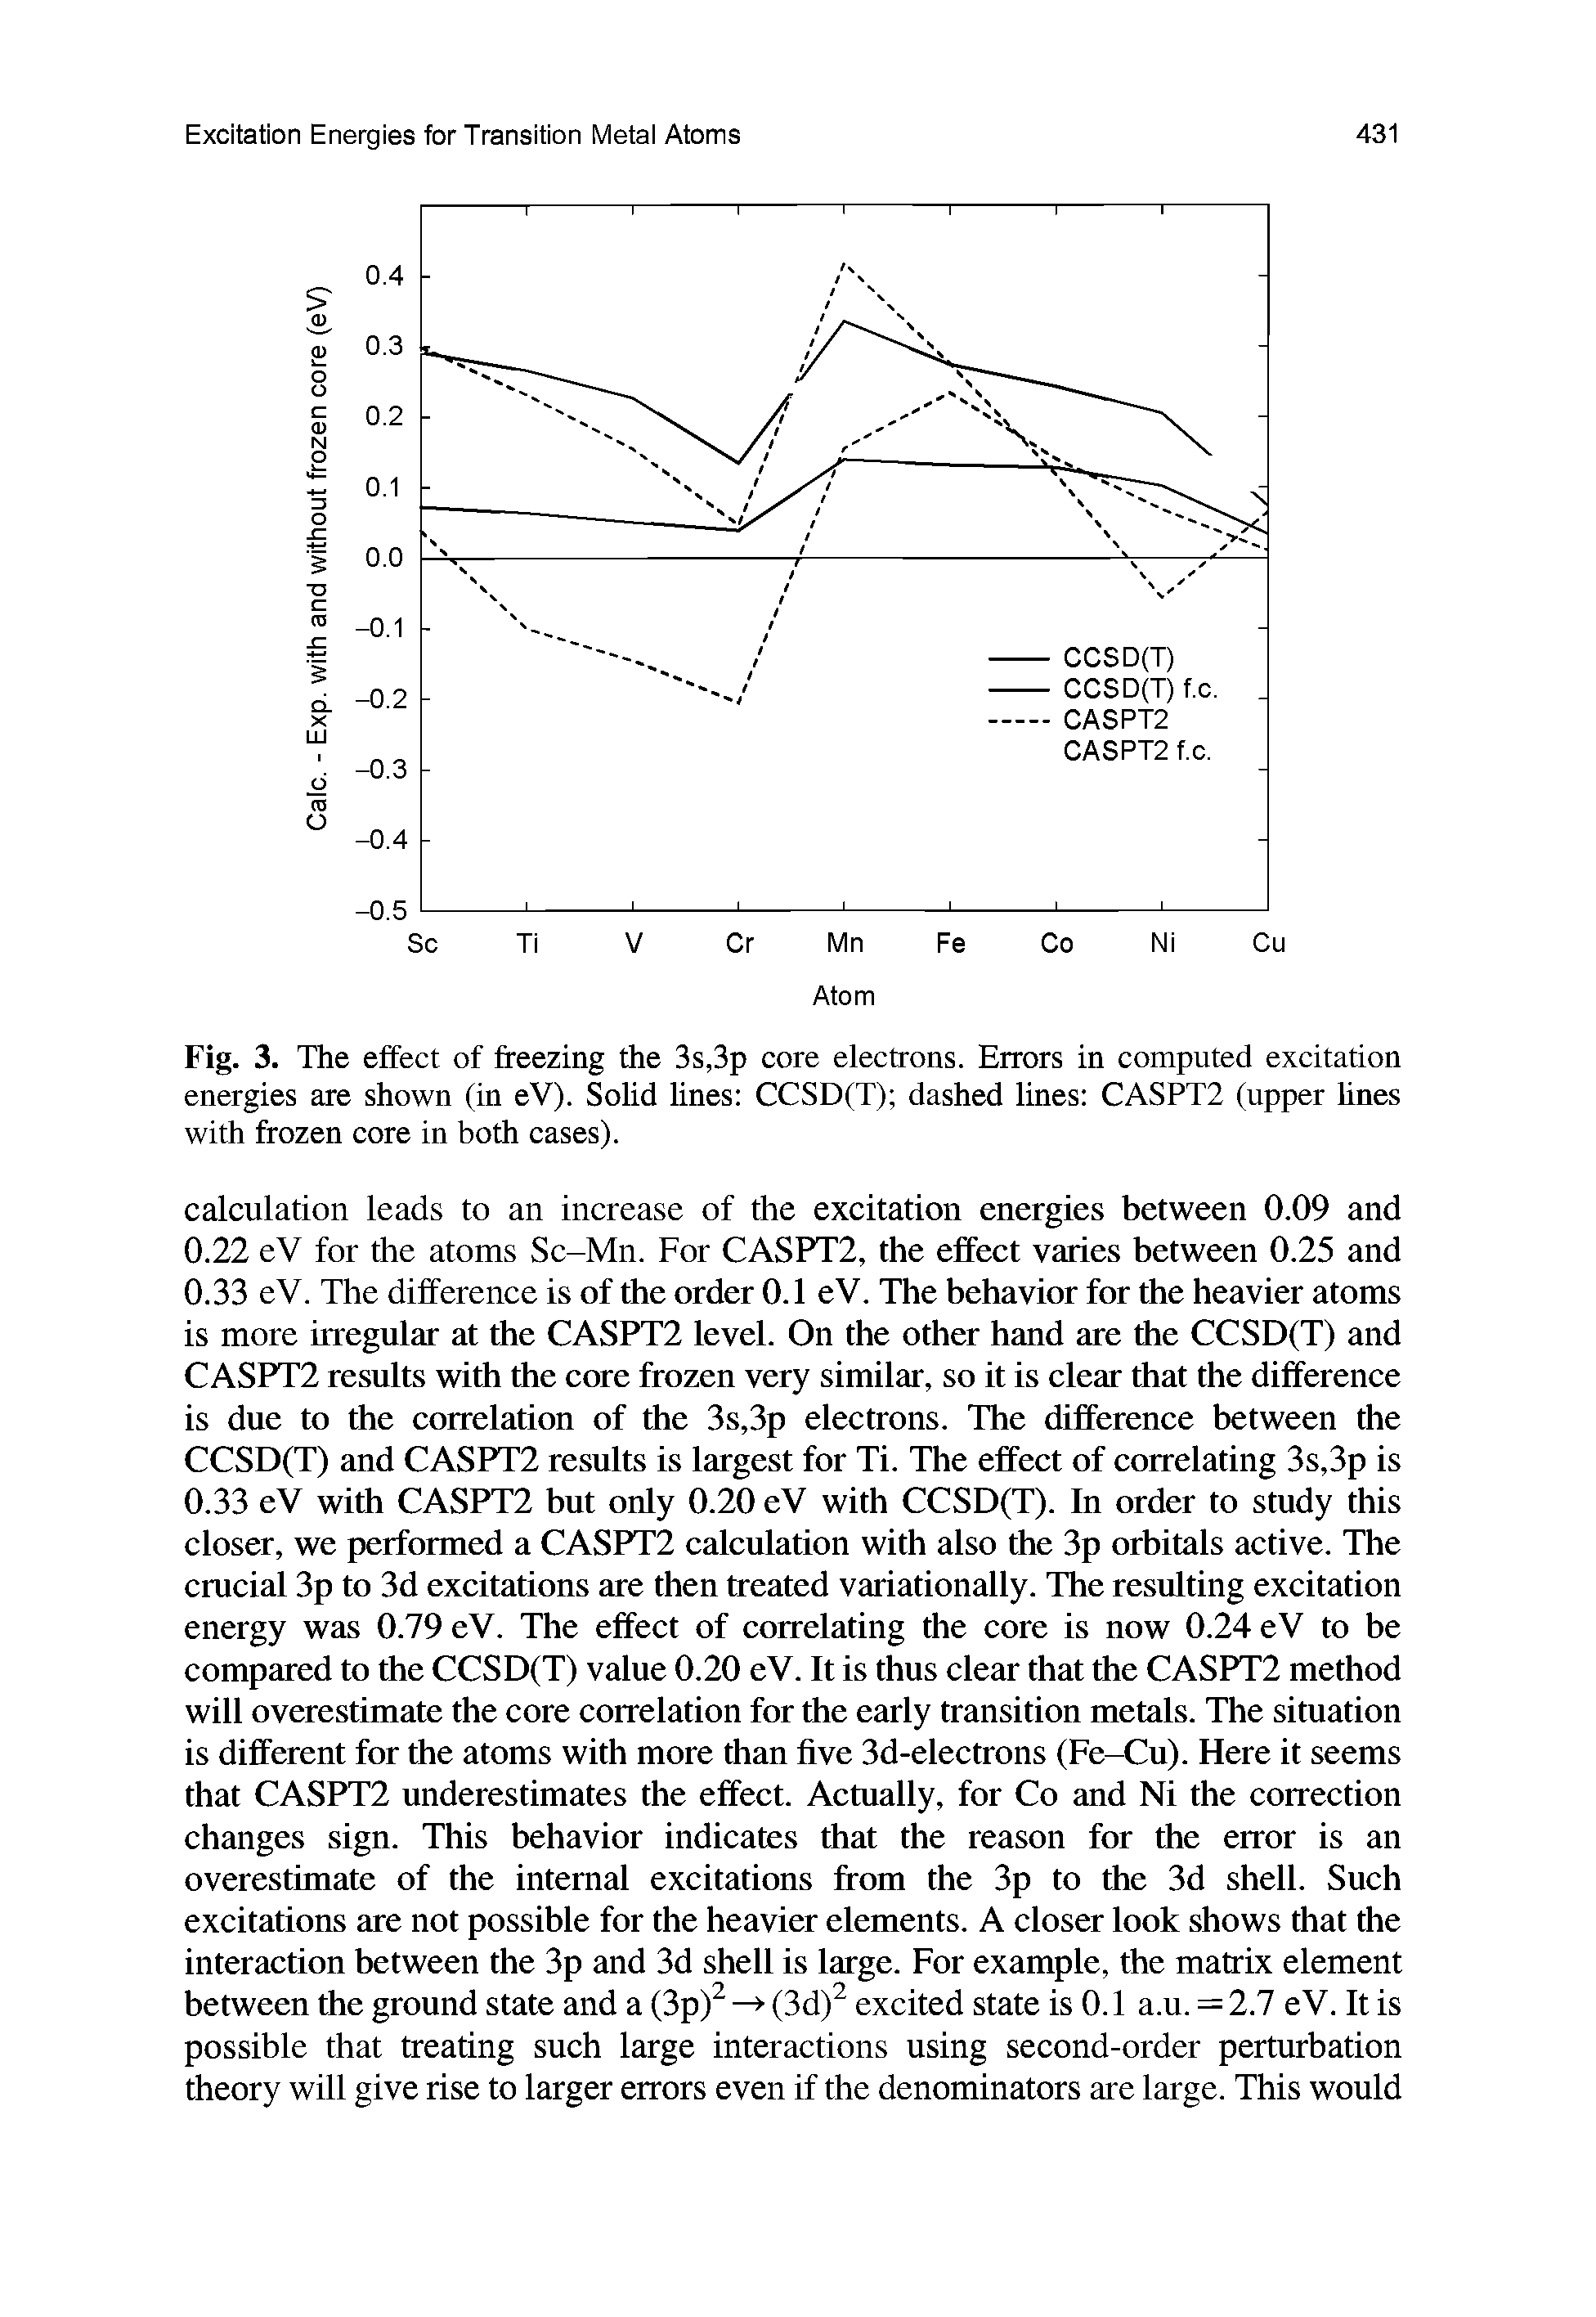 Fig. 3. The effect of freezing the 3s,3p core electrons. Errors in computed excitation energies are shown (in eV). Solid lines CCSD(T) dashed lines CASPT2 (upper hues with frozen core in both cases).